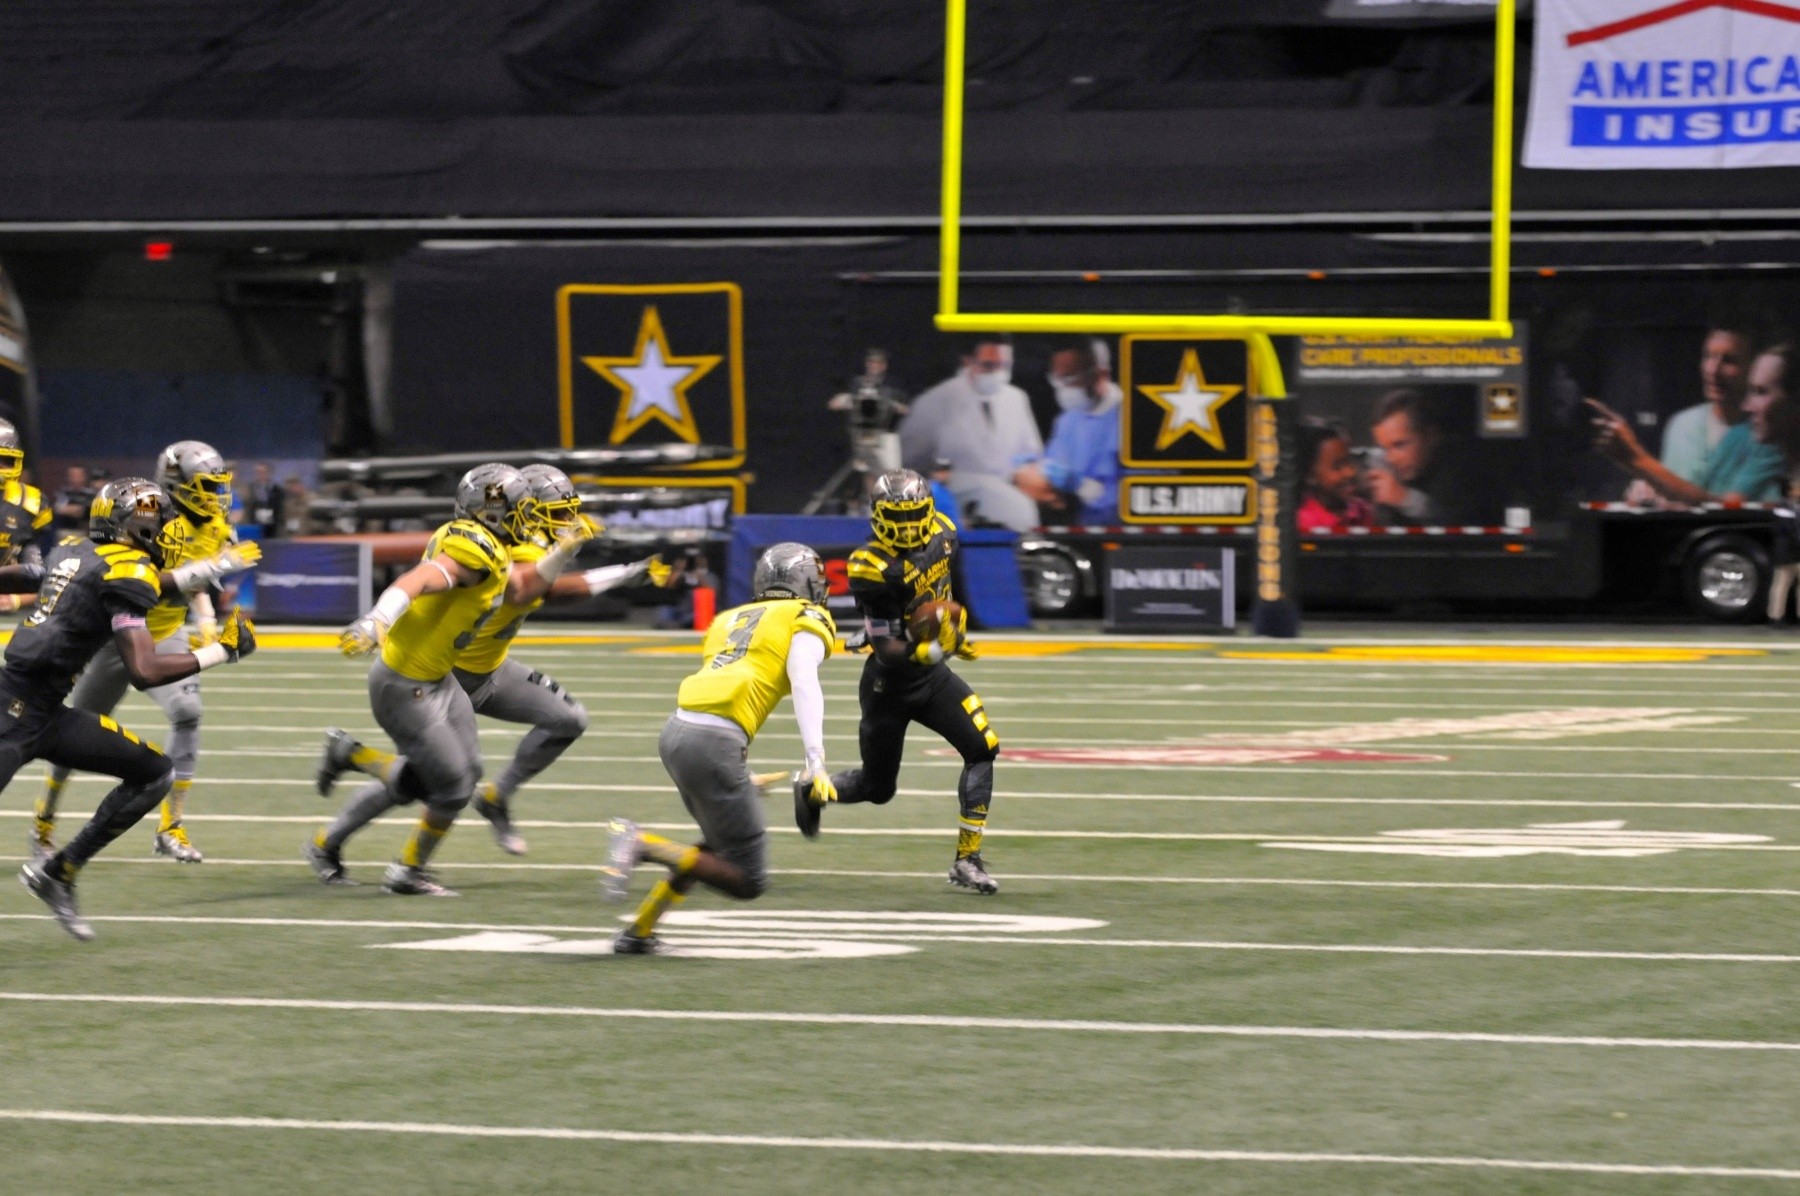 US Army holds AllAmerican Bowl in San Antonio Article The United